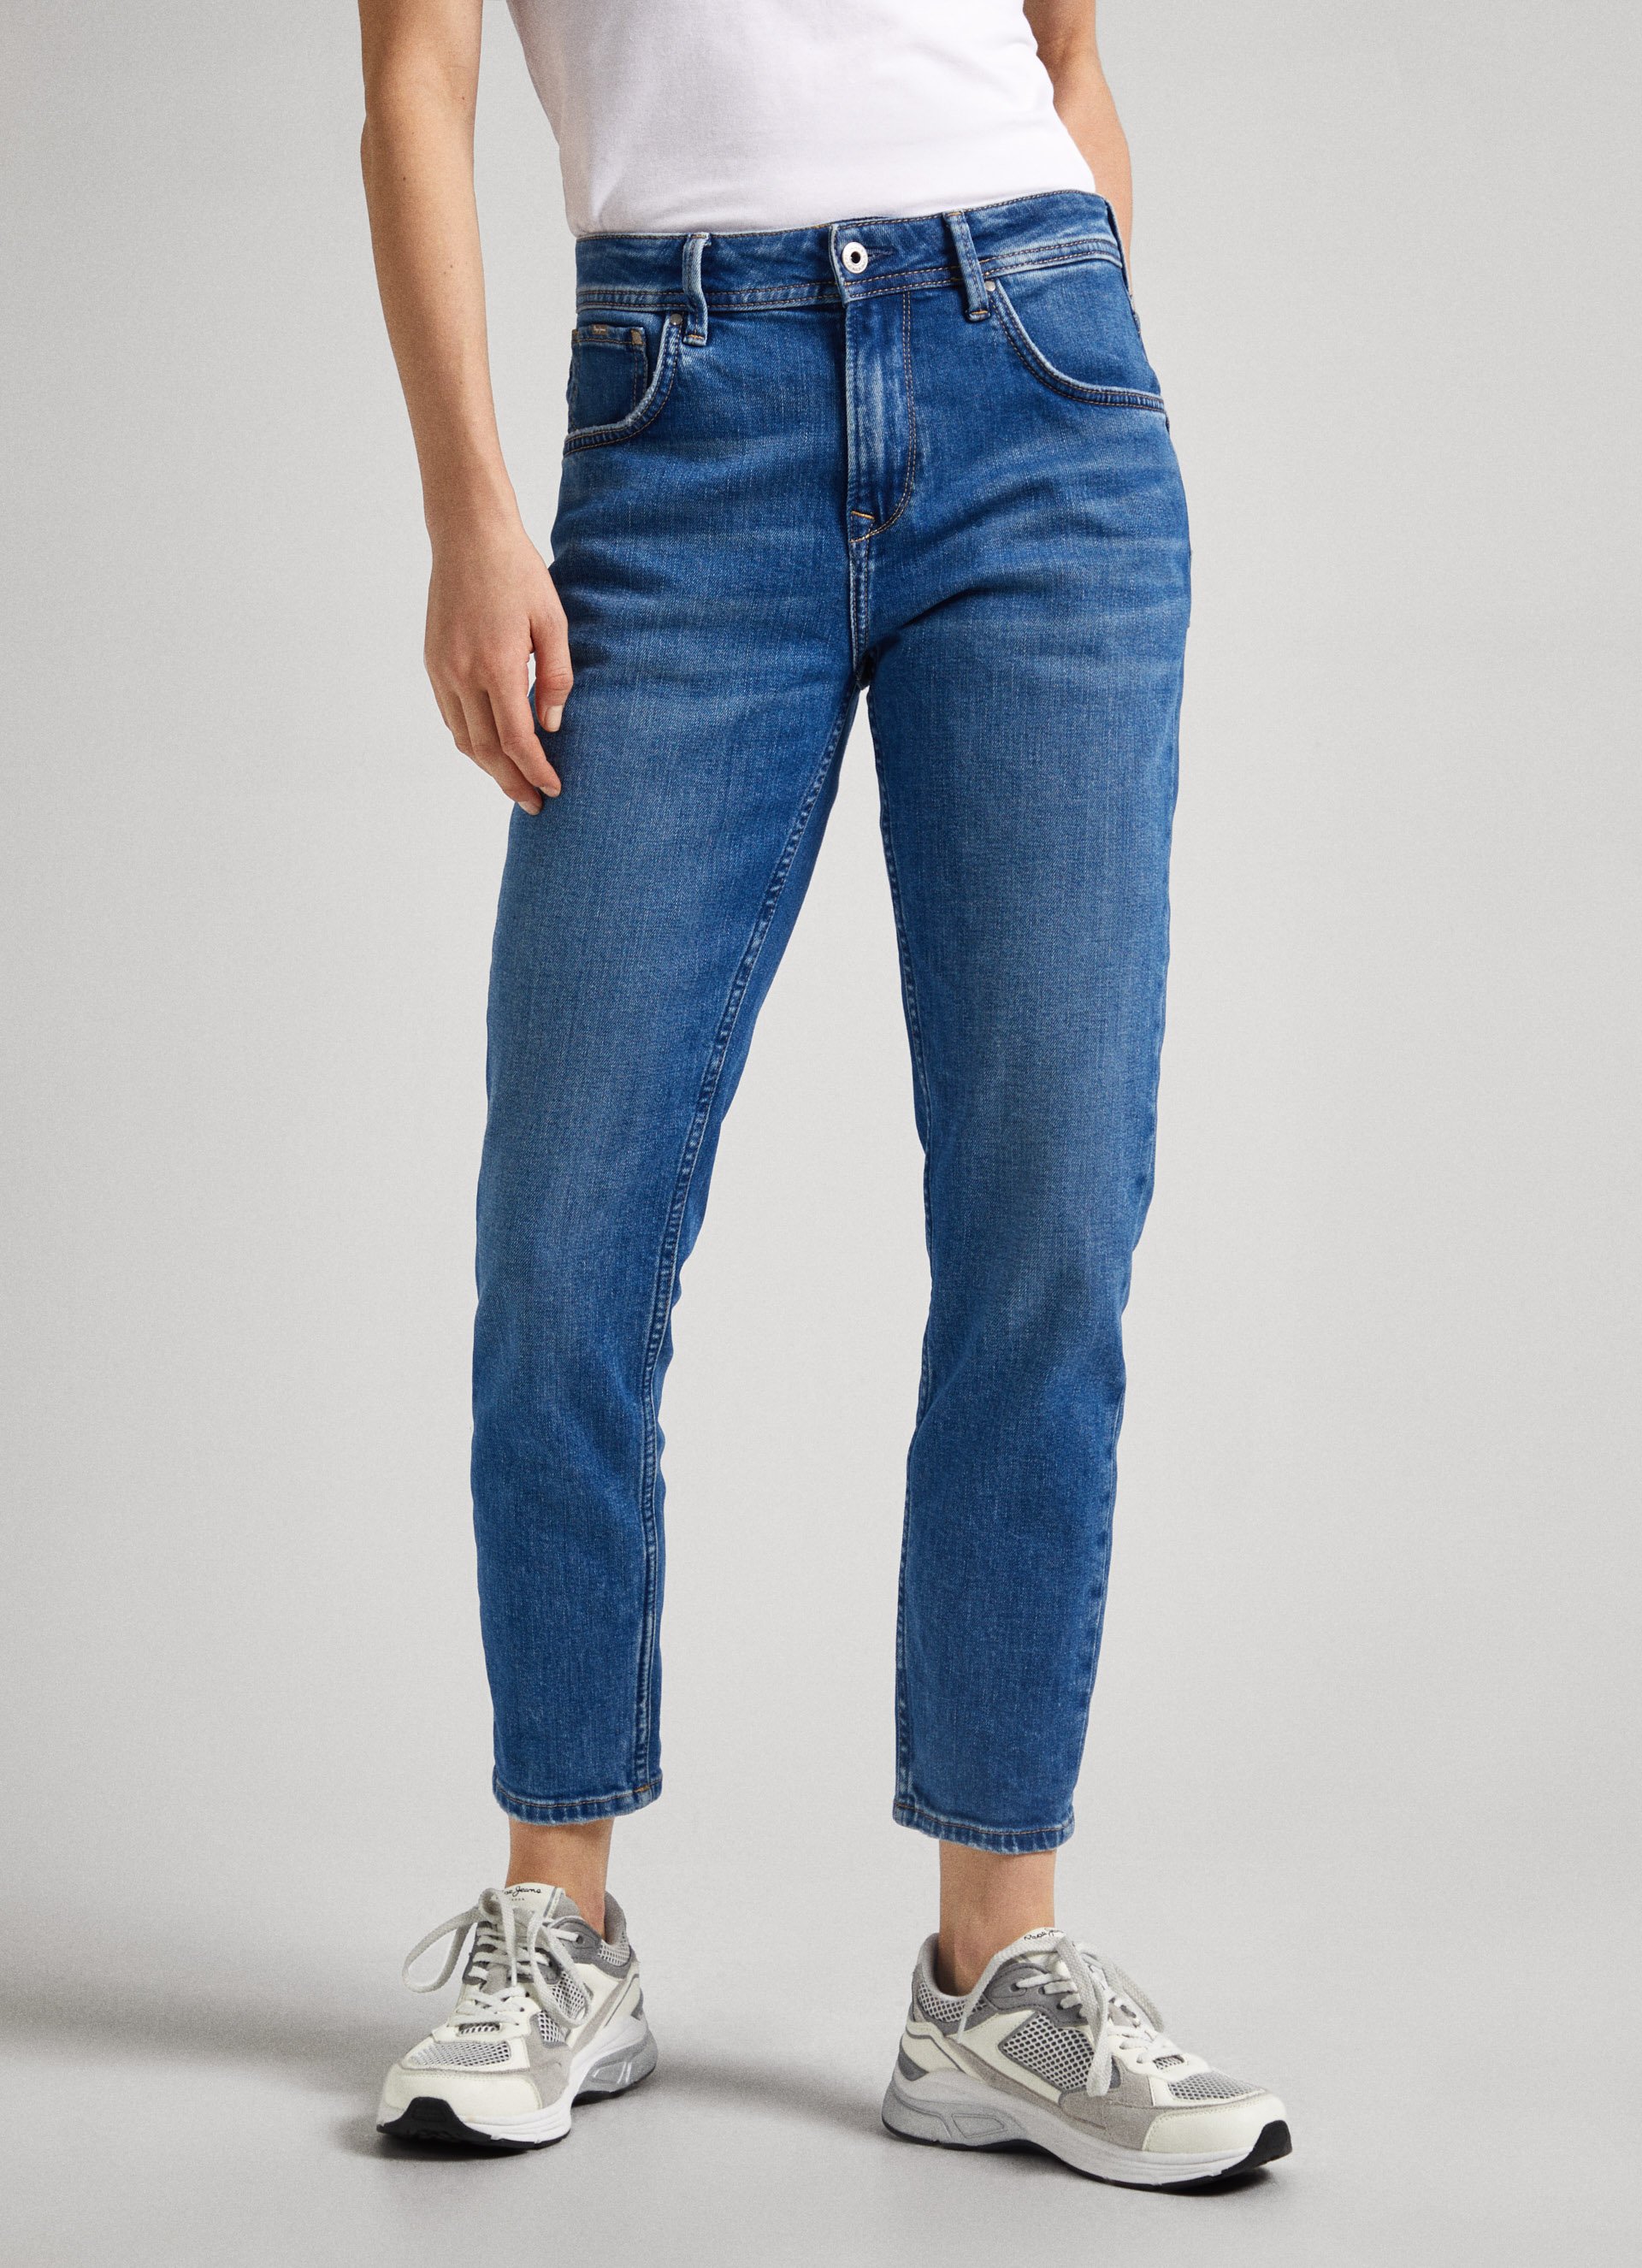 Persona geur Oxideren Violet Relaxed Fit High Waist Jean | Pepe Jeans